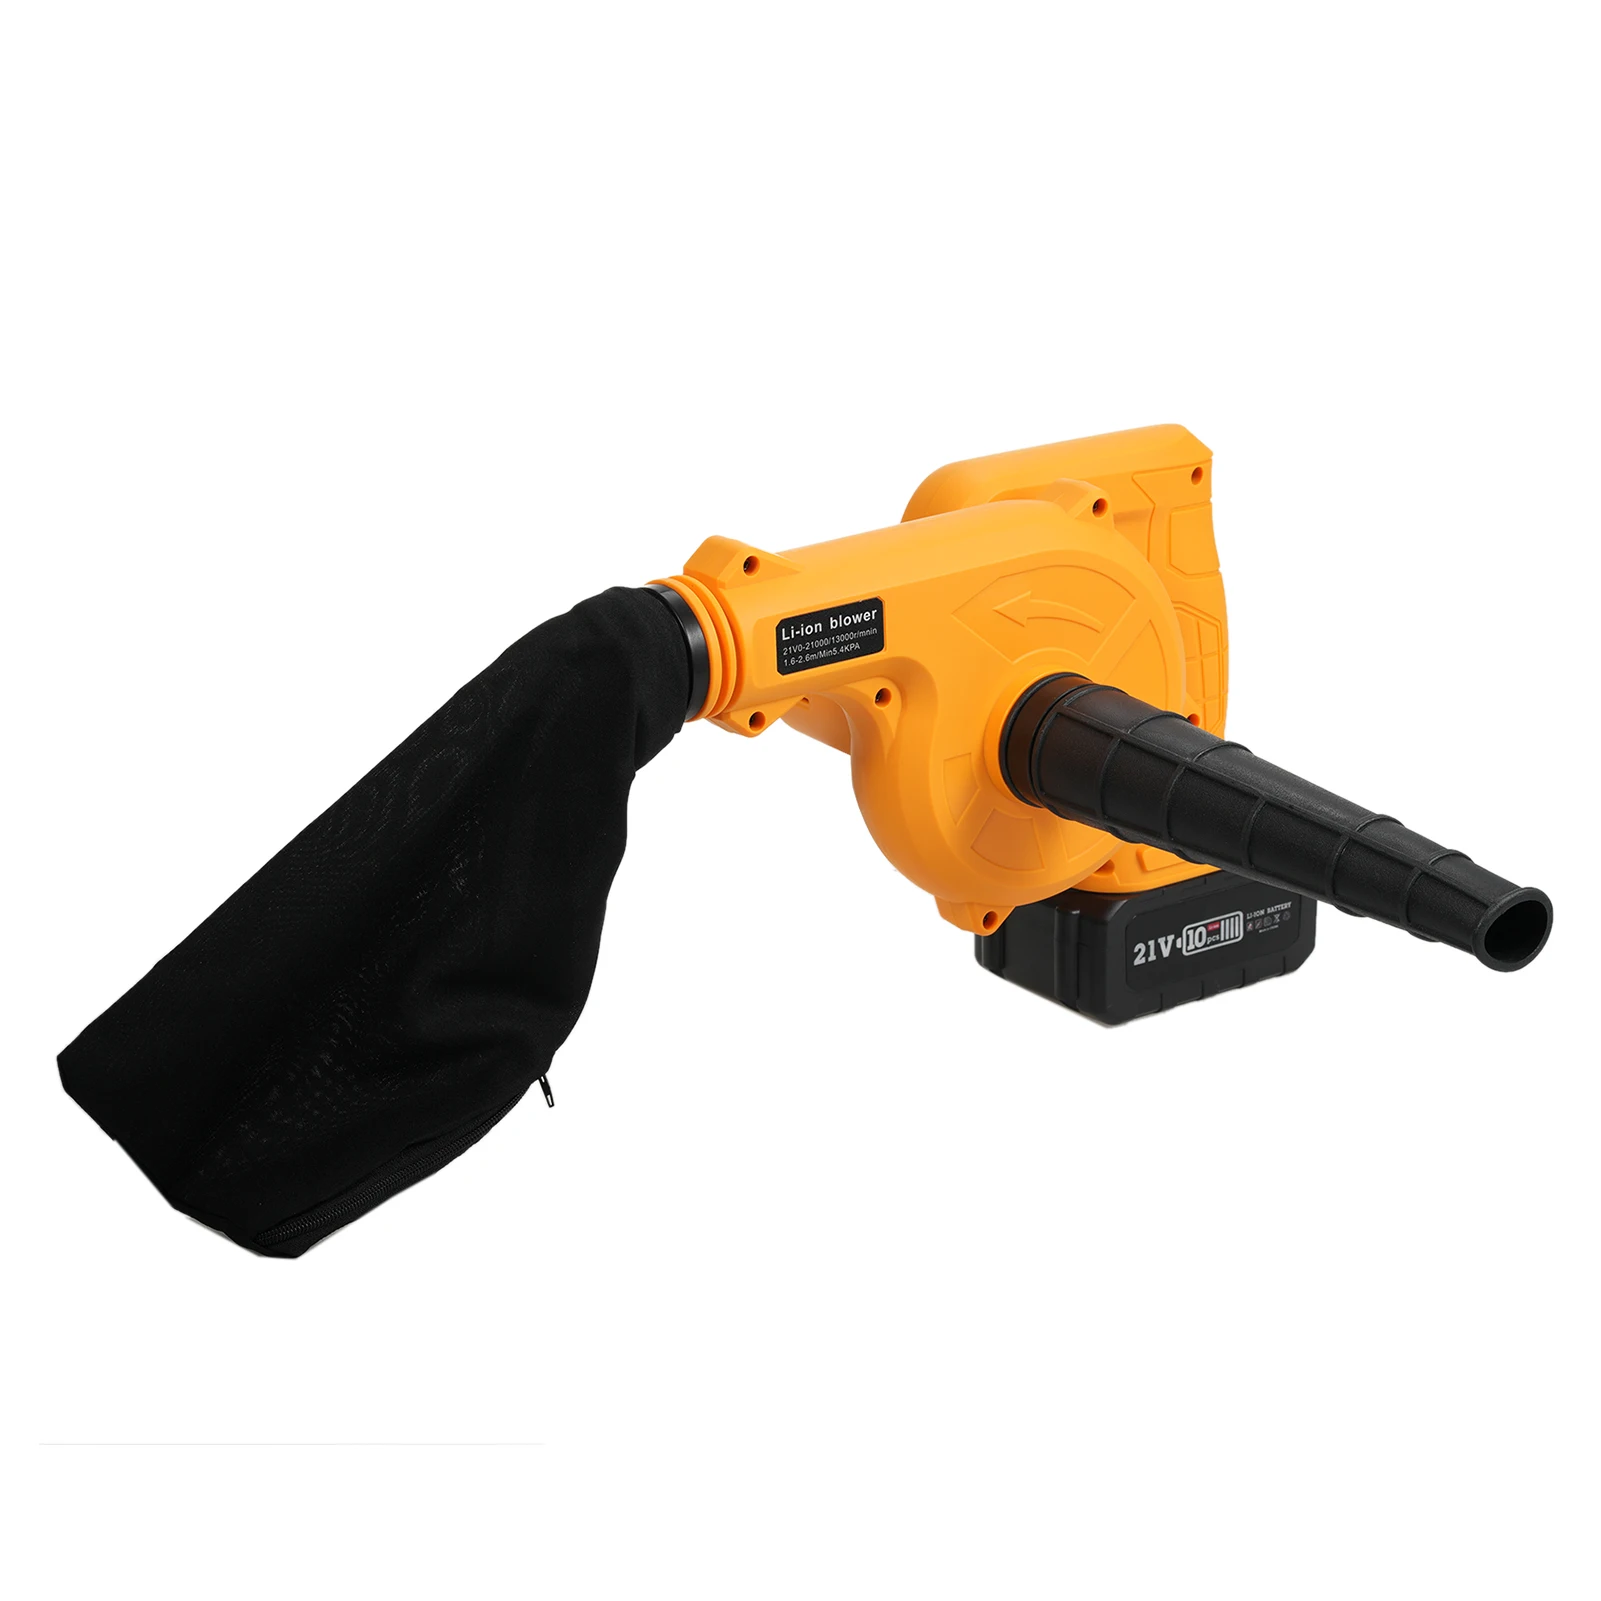 Sb1c6e3e1bdf14a049edd384e39d0080aC 21V Rechargeable Li-ion Electric Blower Cordless Leaf Blower Large Power Air blower Dust Blowing Machine for Leaf Cleaning